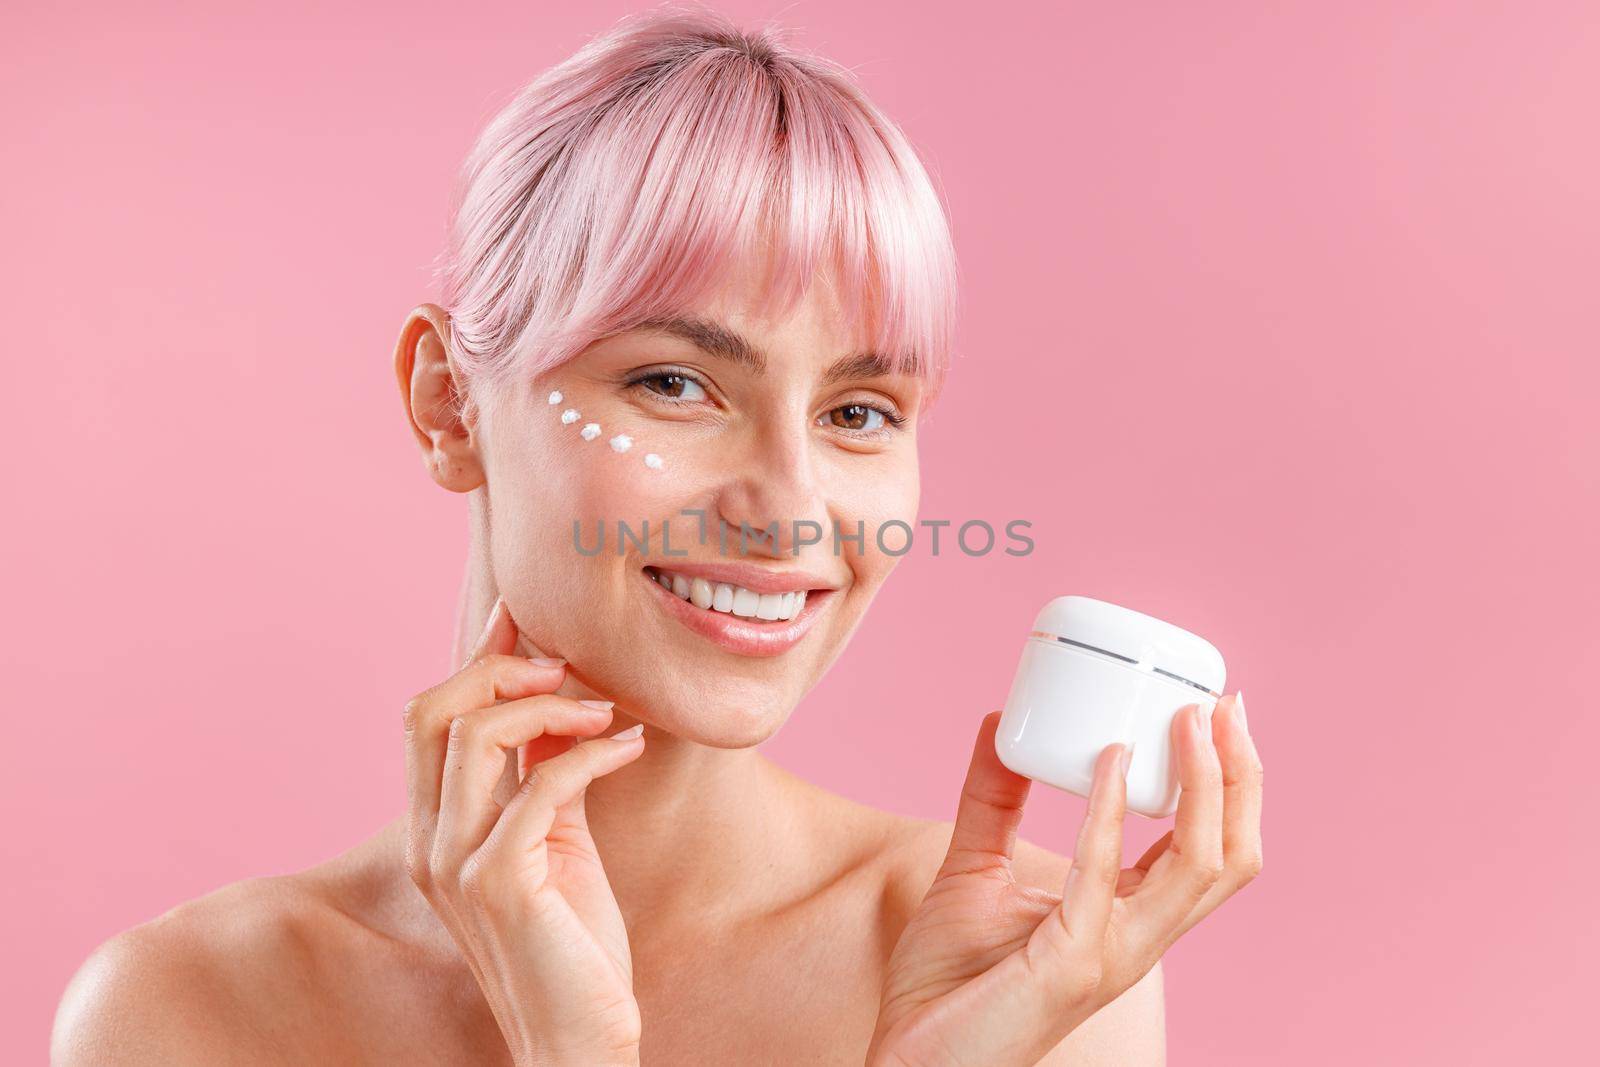 Portrait of gorgeous woman with pink hair and face cream applied on her skin like dots smiling and holding cream in white jar isolated over pink background. Beauty, spa, skin care concept